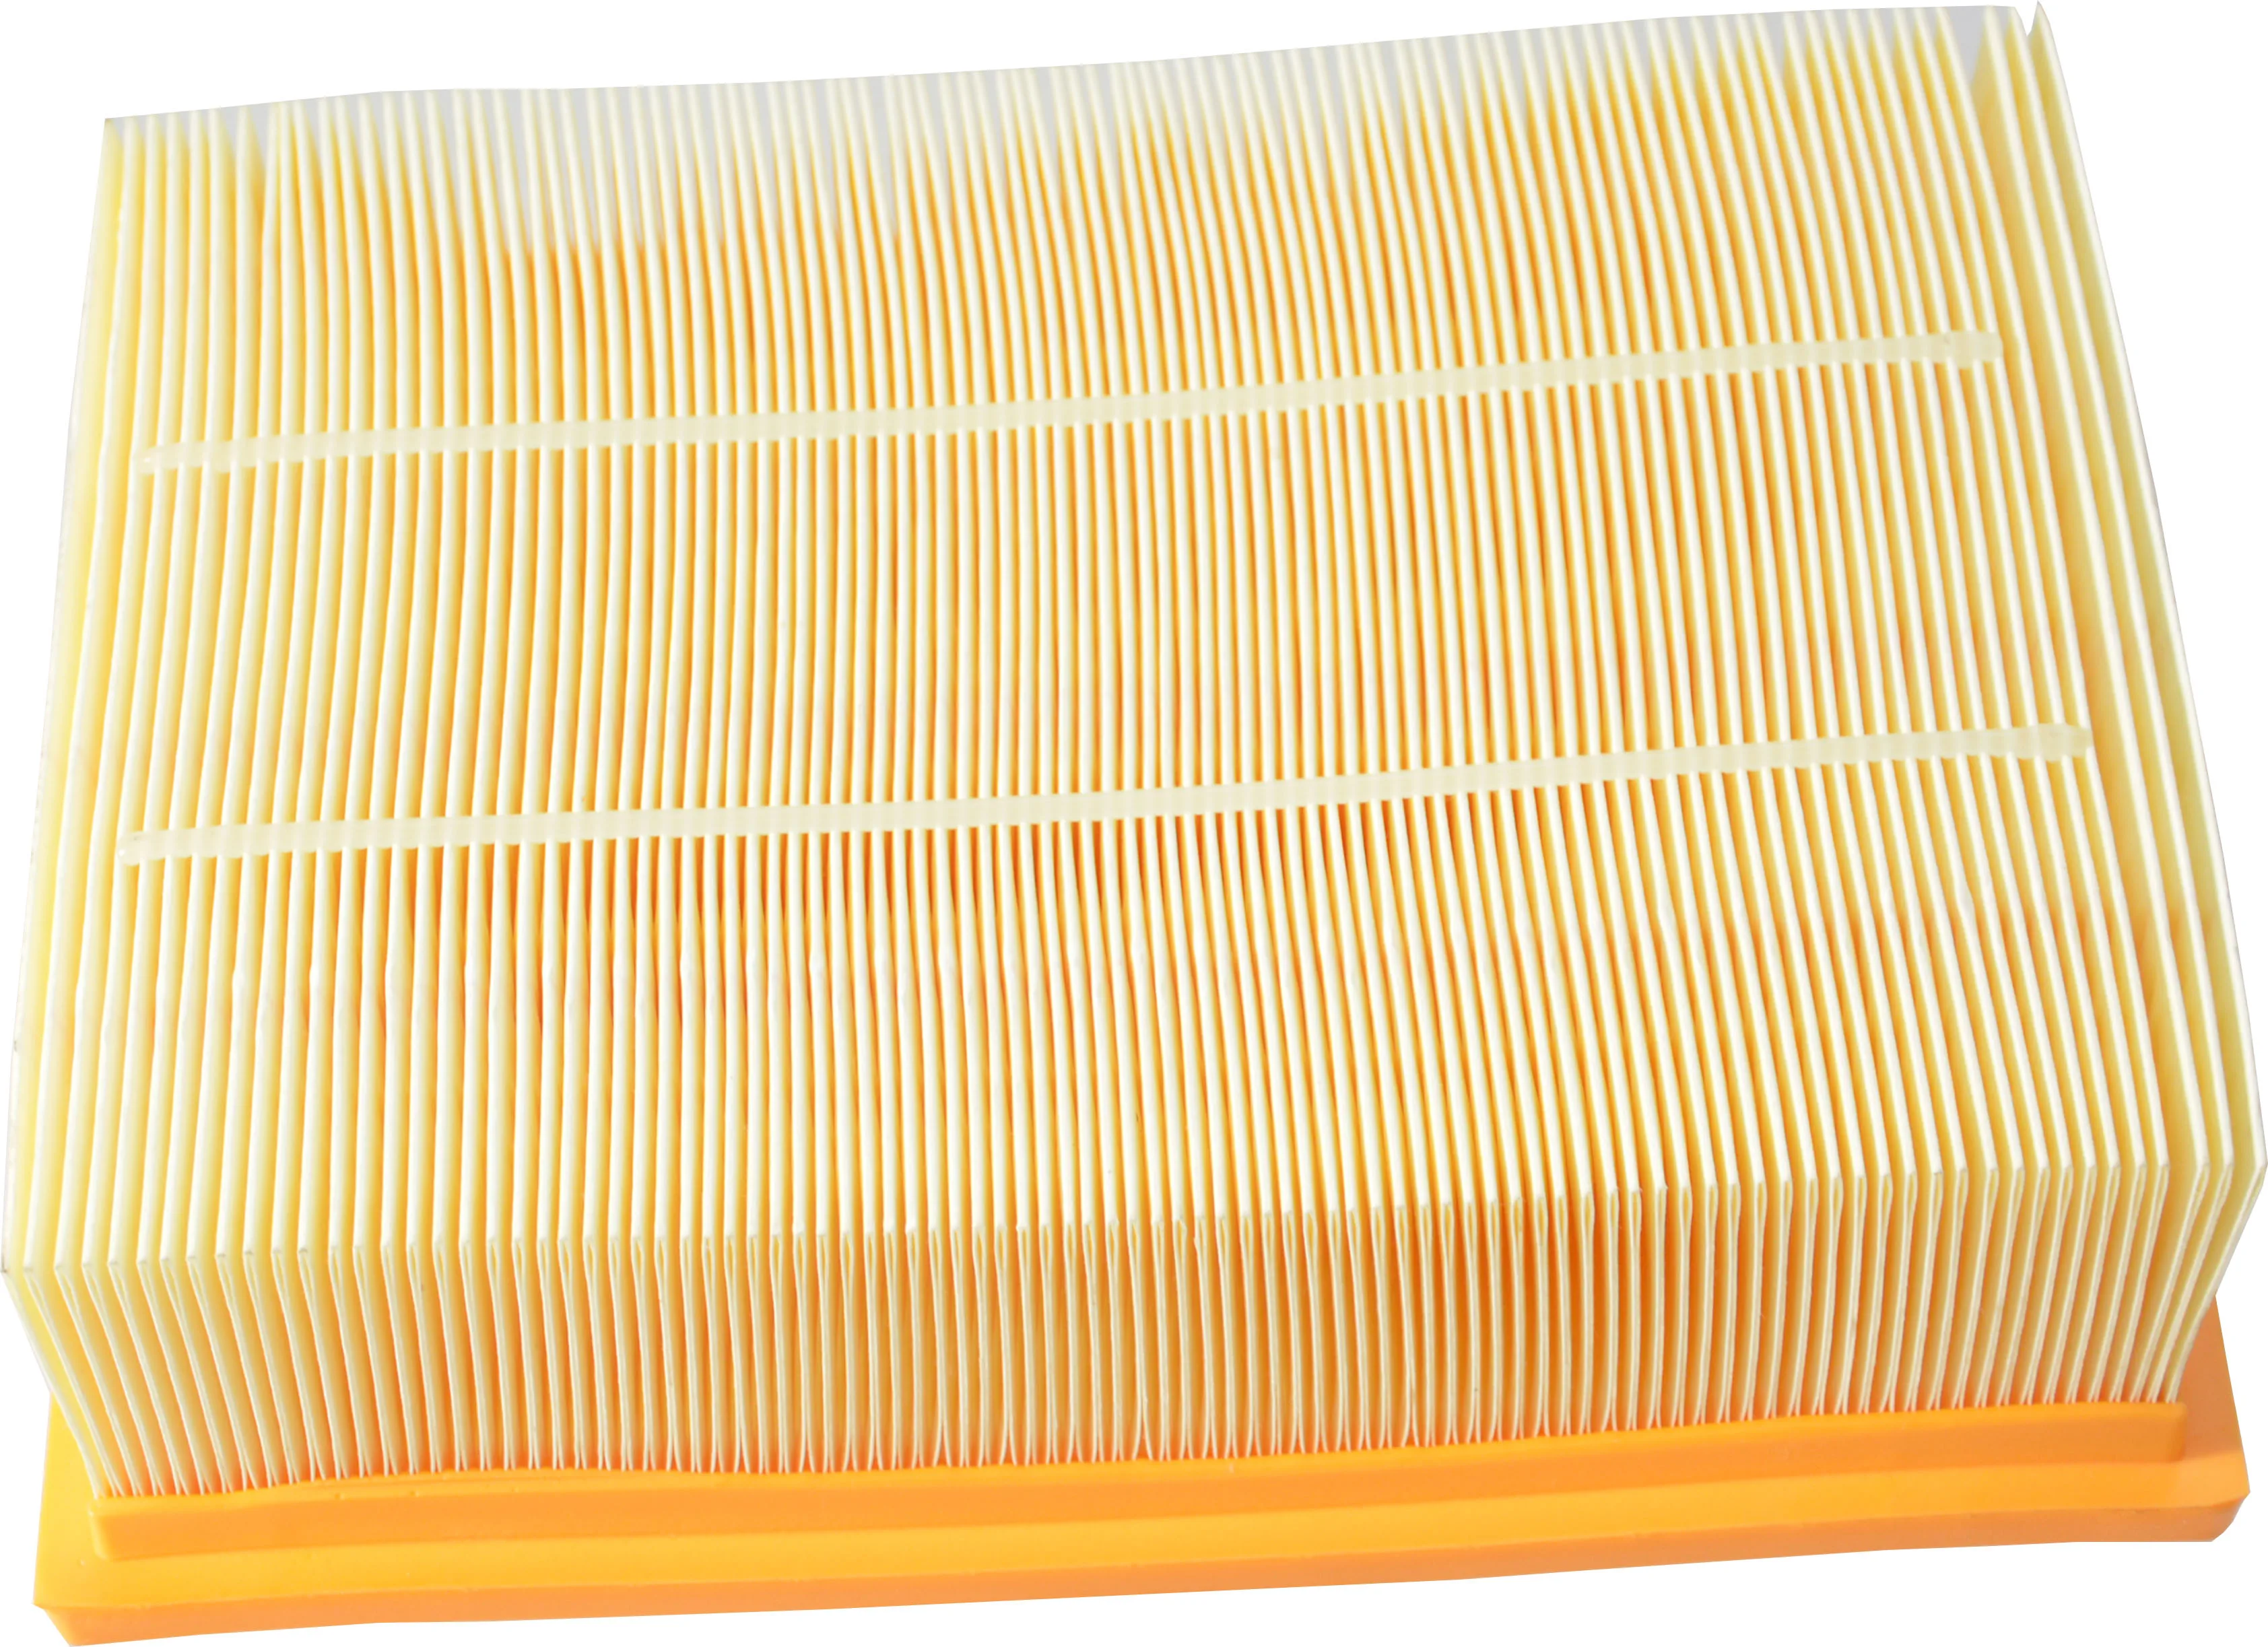 Car Air Filter Element For FOTON Tunland 2.4L (2012-2019) 4G69S4N,4G69S4M Tunland E3 2.4L (2016-2019) OEM FP1119019010AW0018